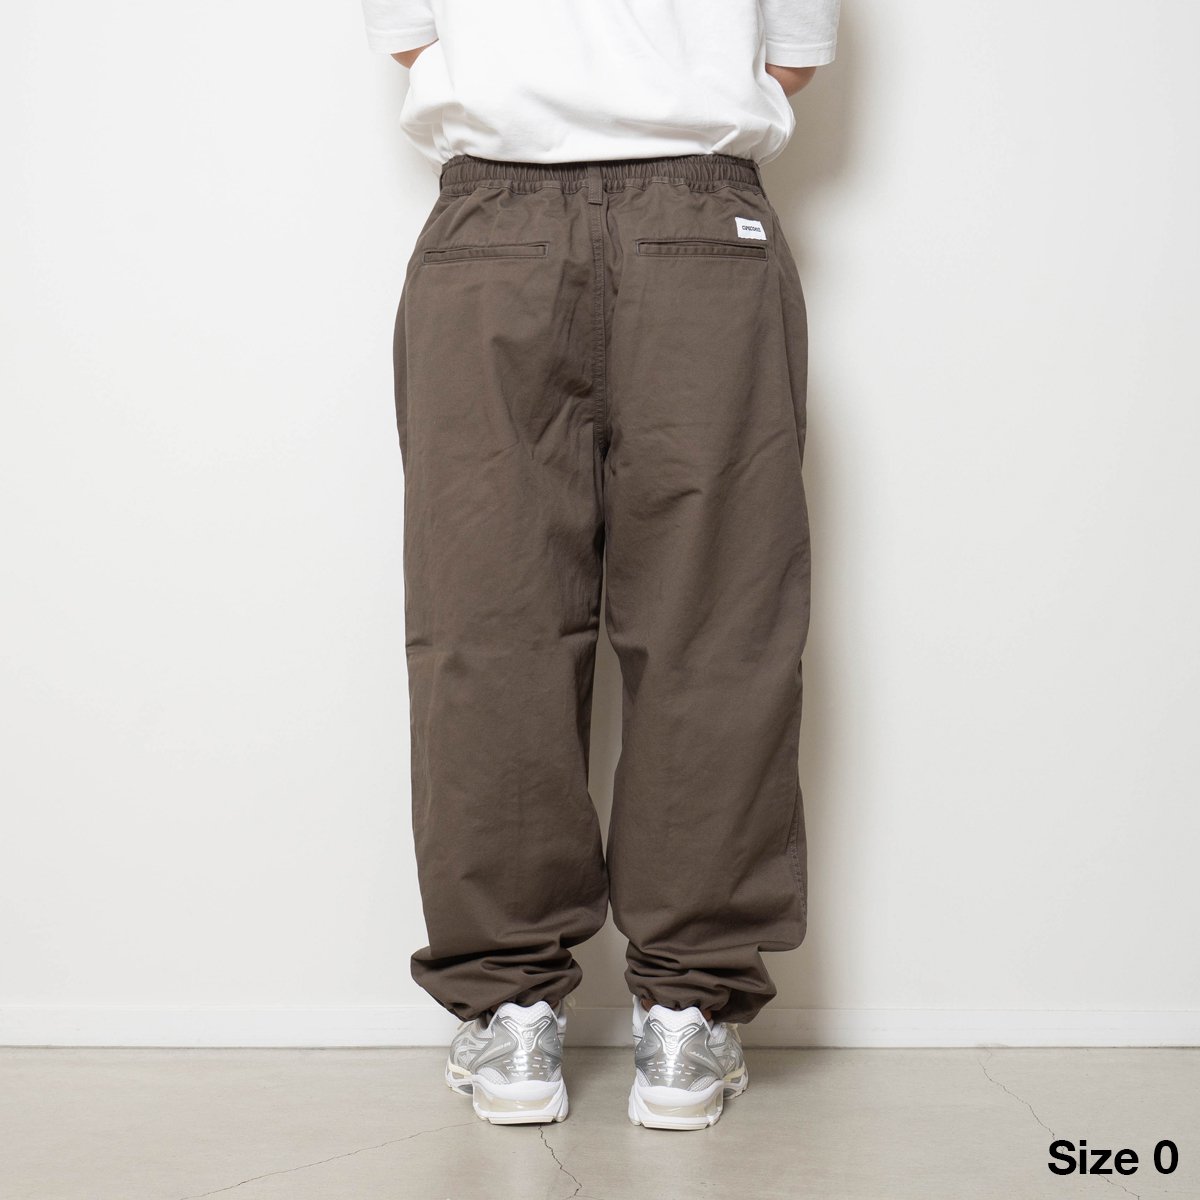 Cotton Twill Baggy Pants - Mocha - CUP AND CONE